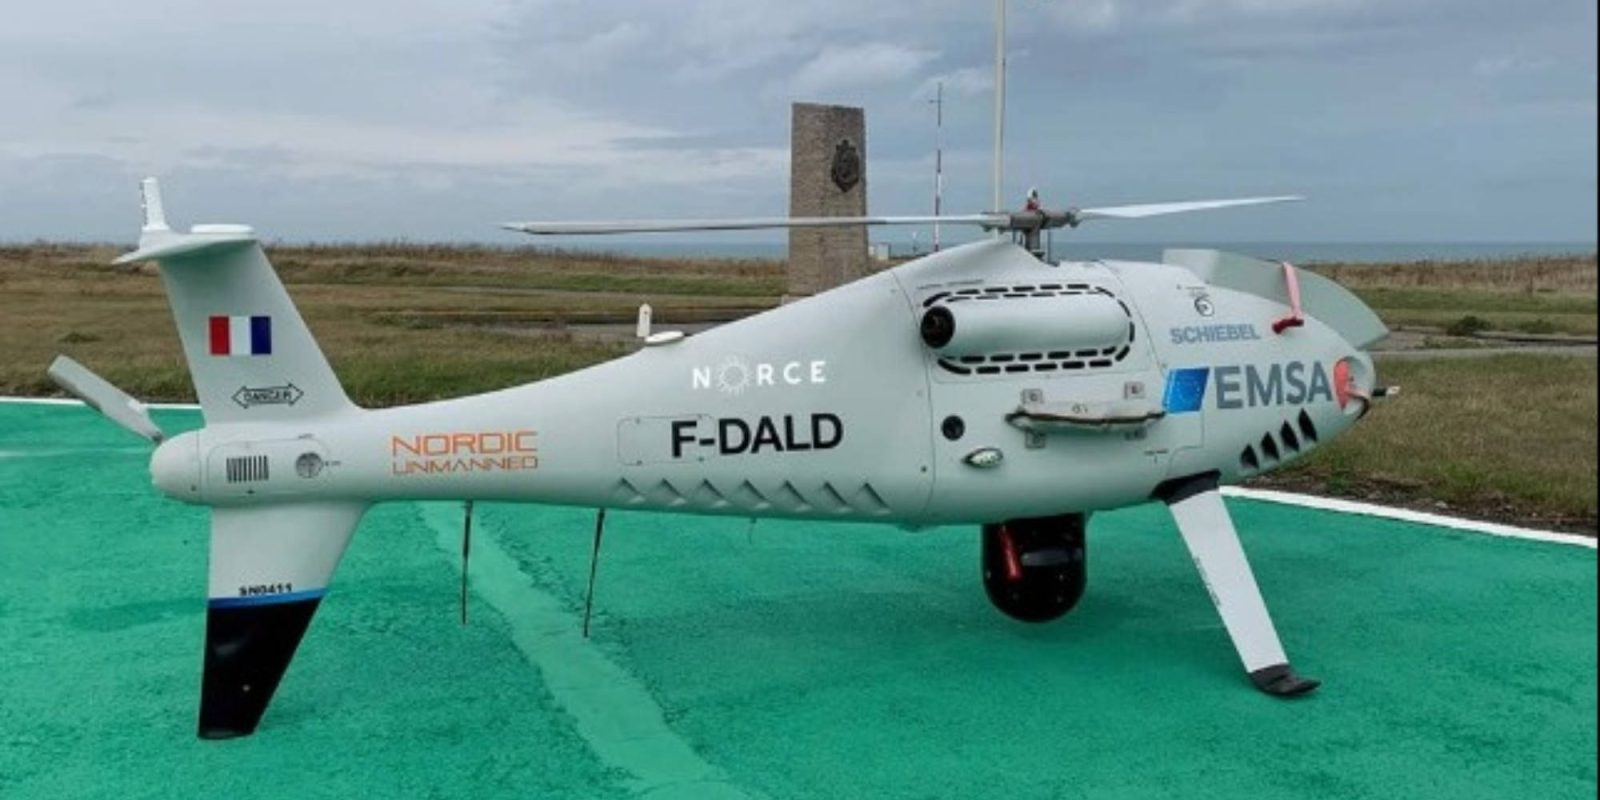 France sulfur sniffing drones